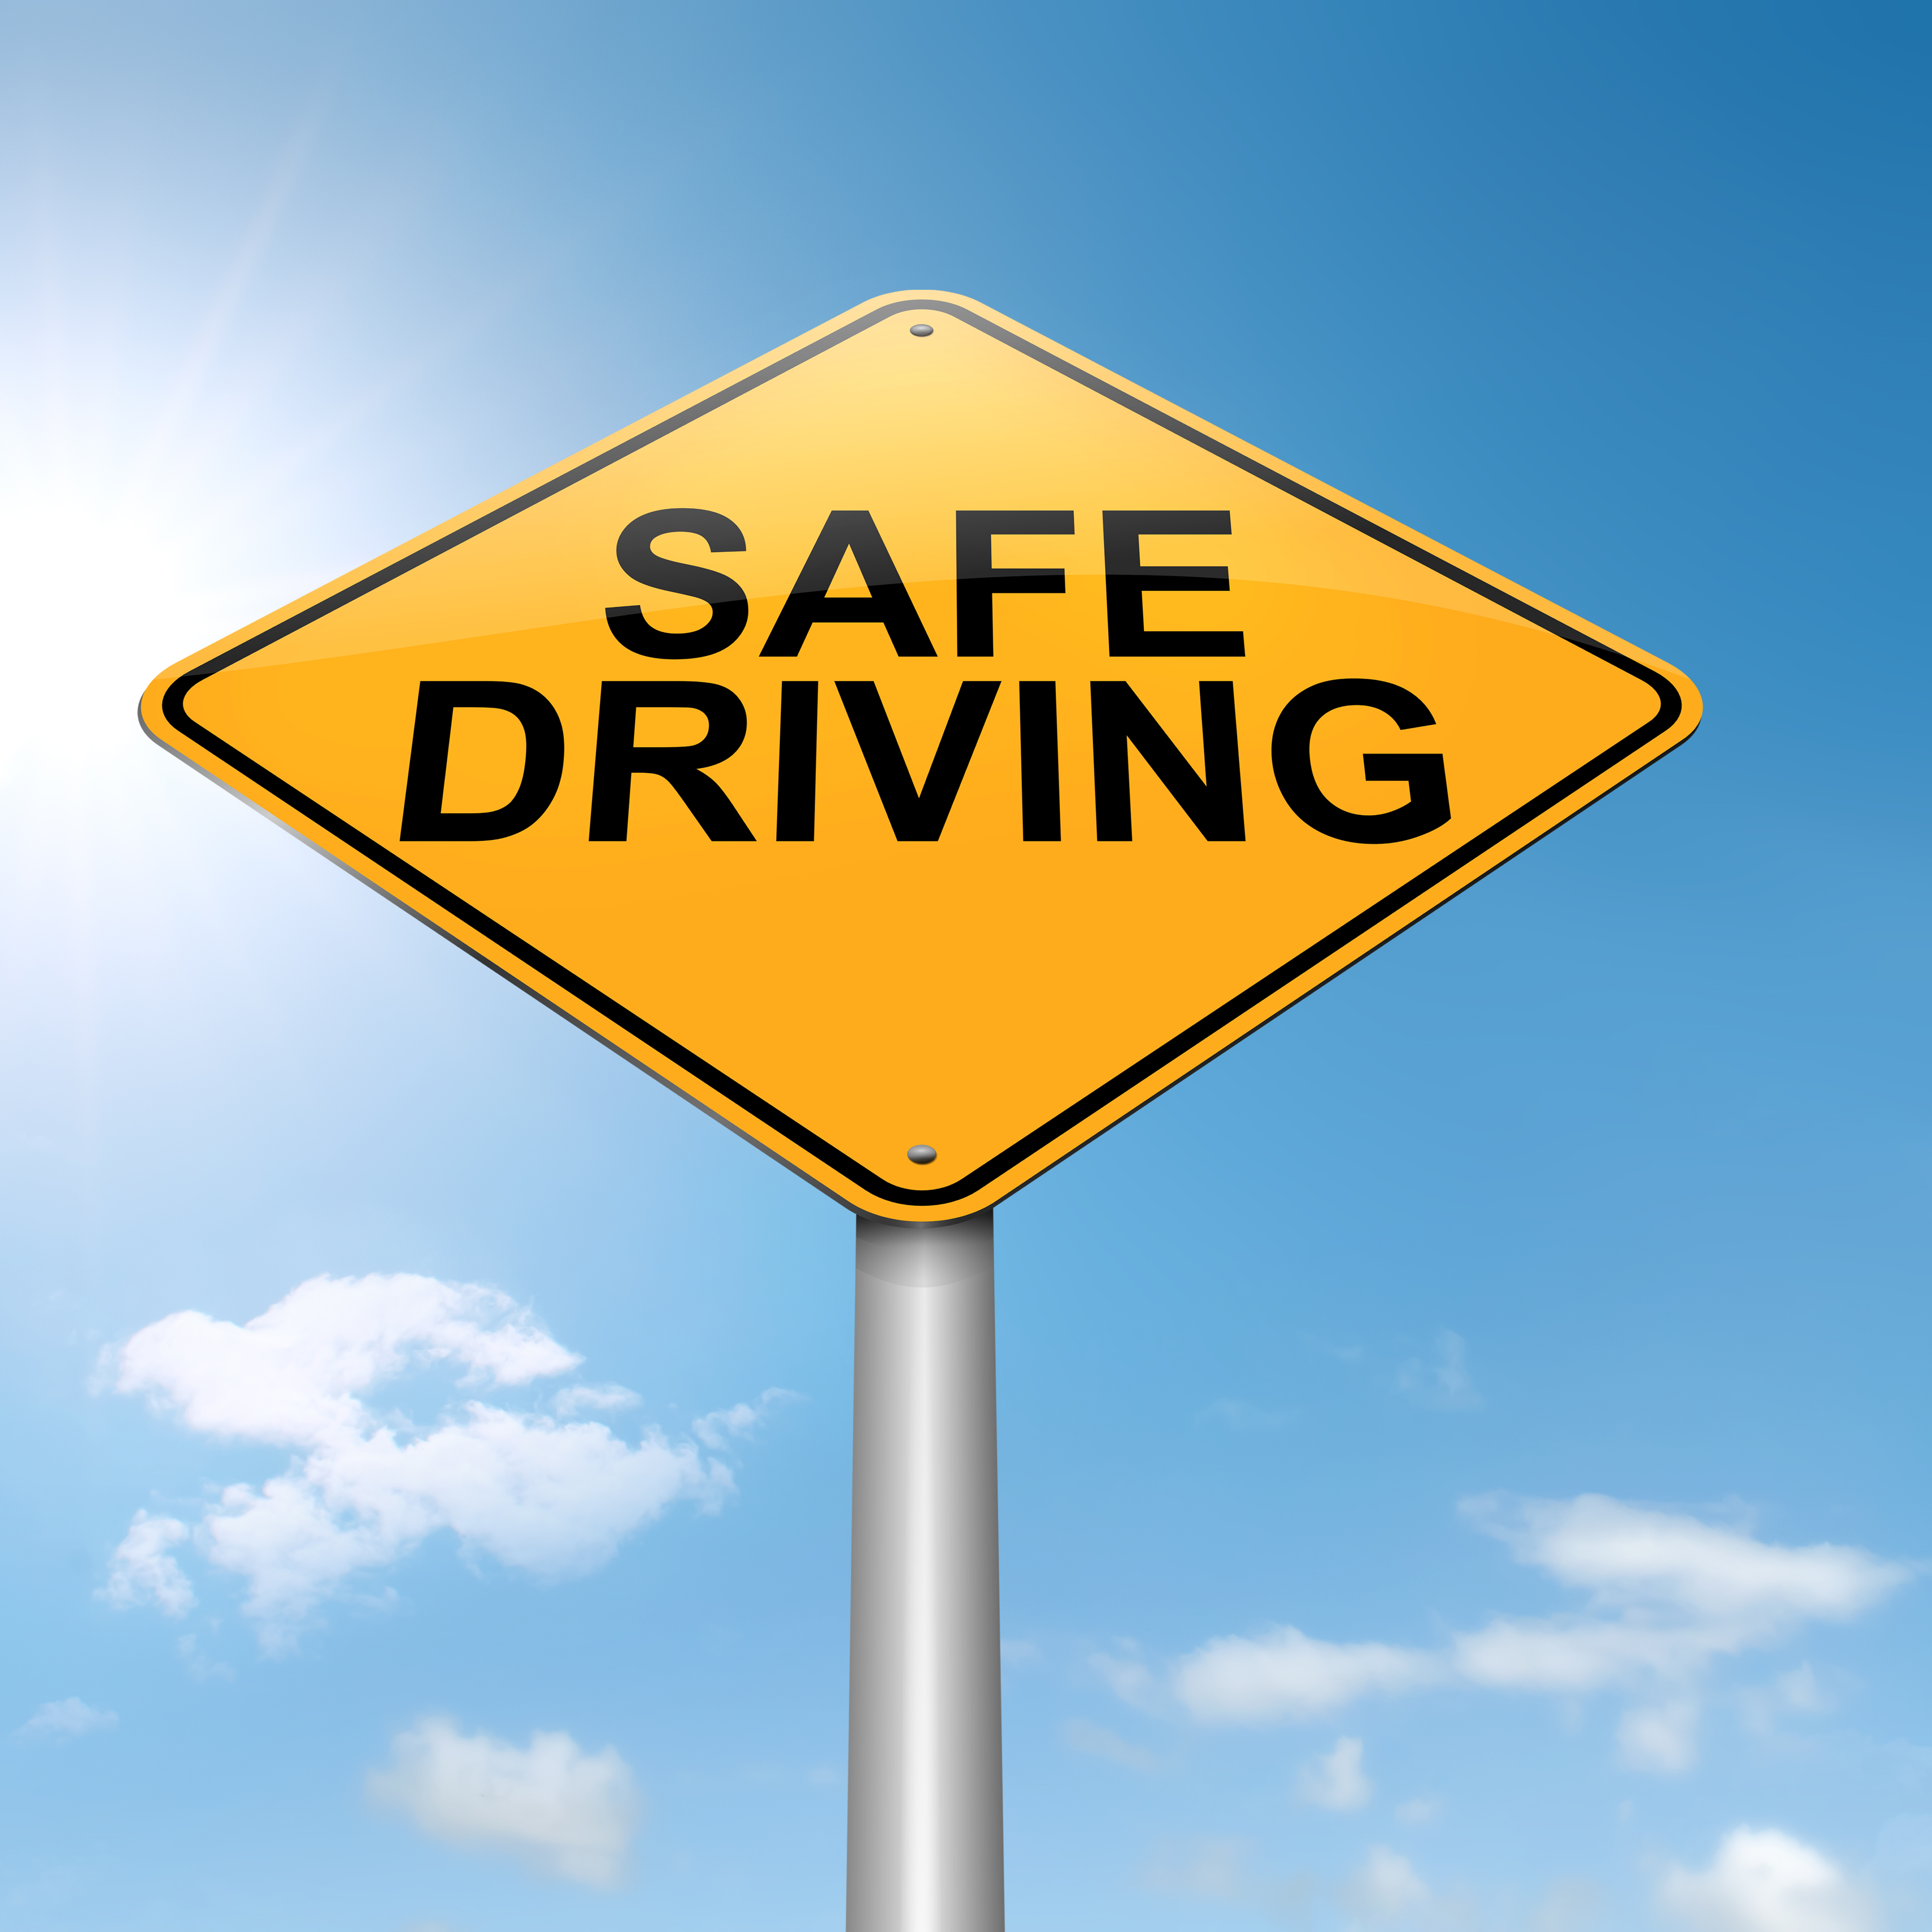 Safe Driving Tips For Toyota Owners